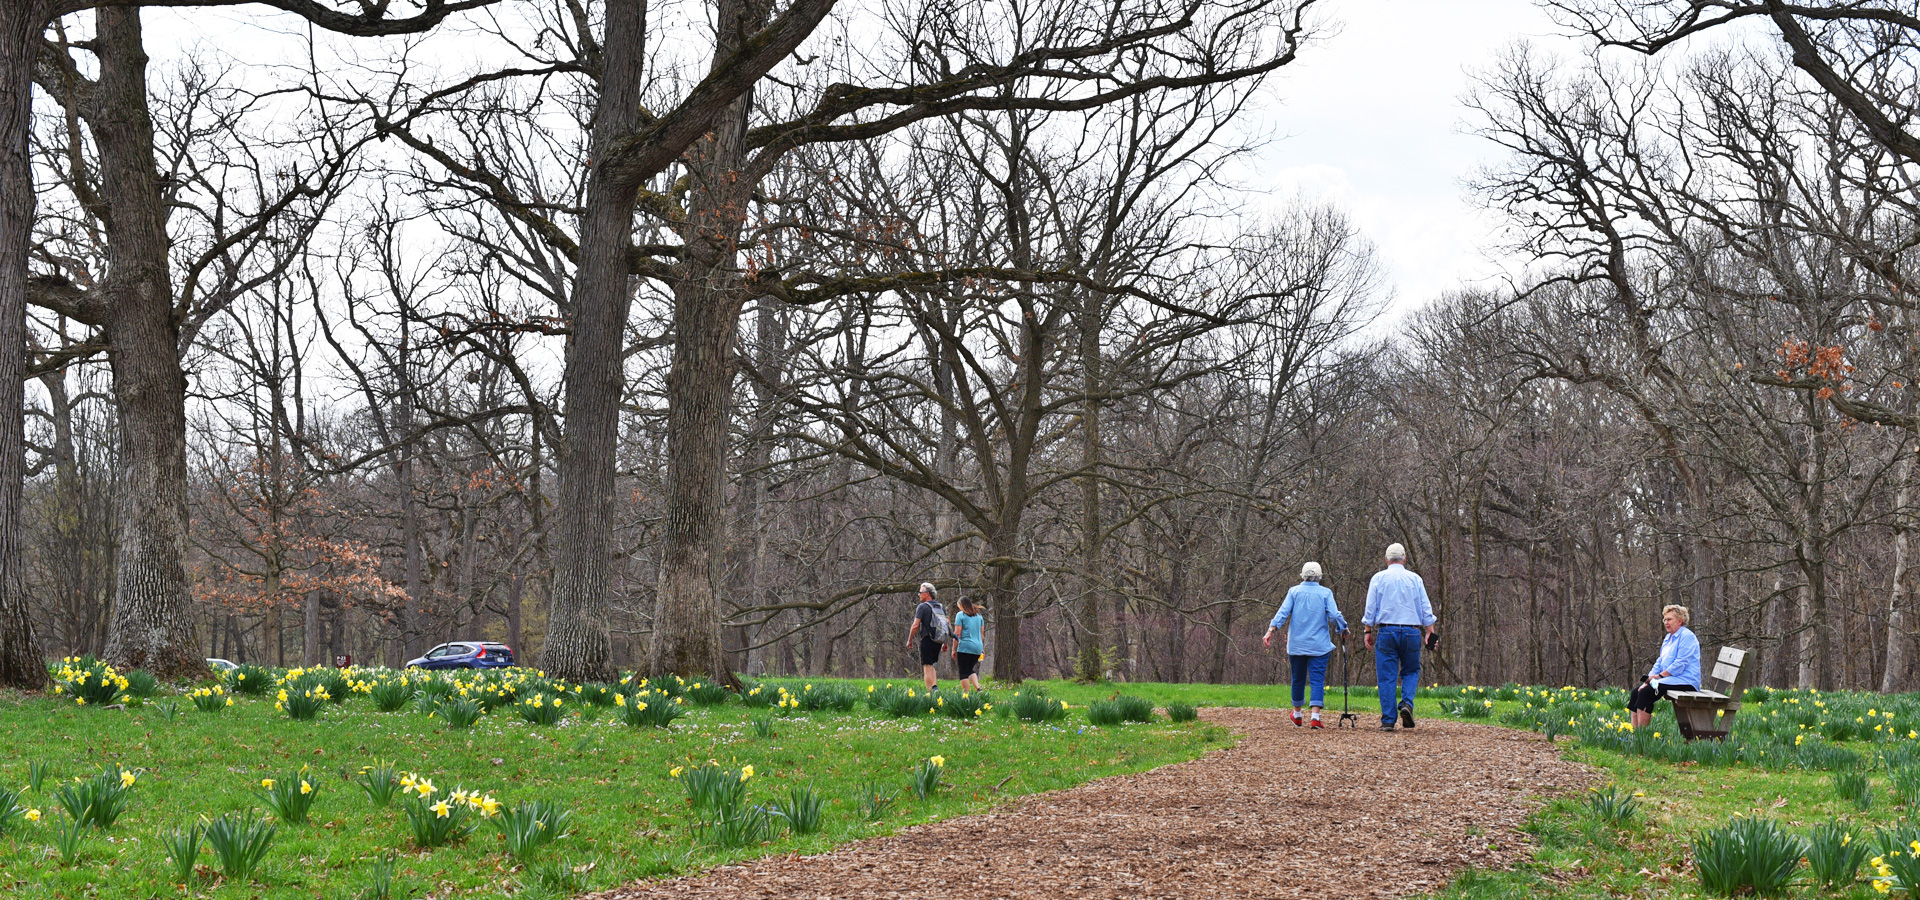 Guests walk among daffodil glade in spring